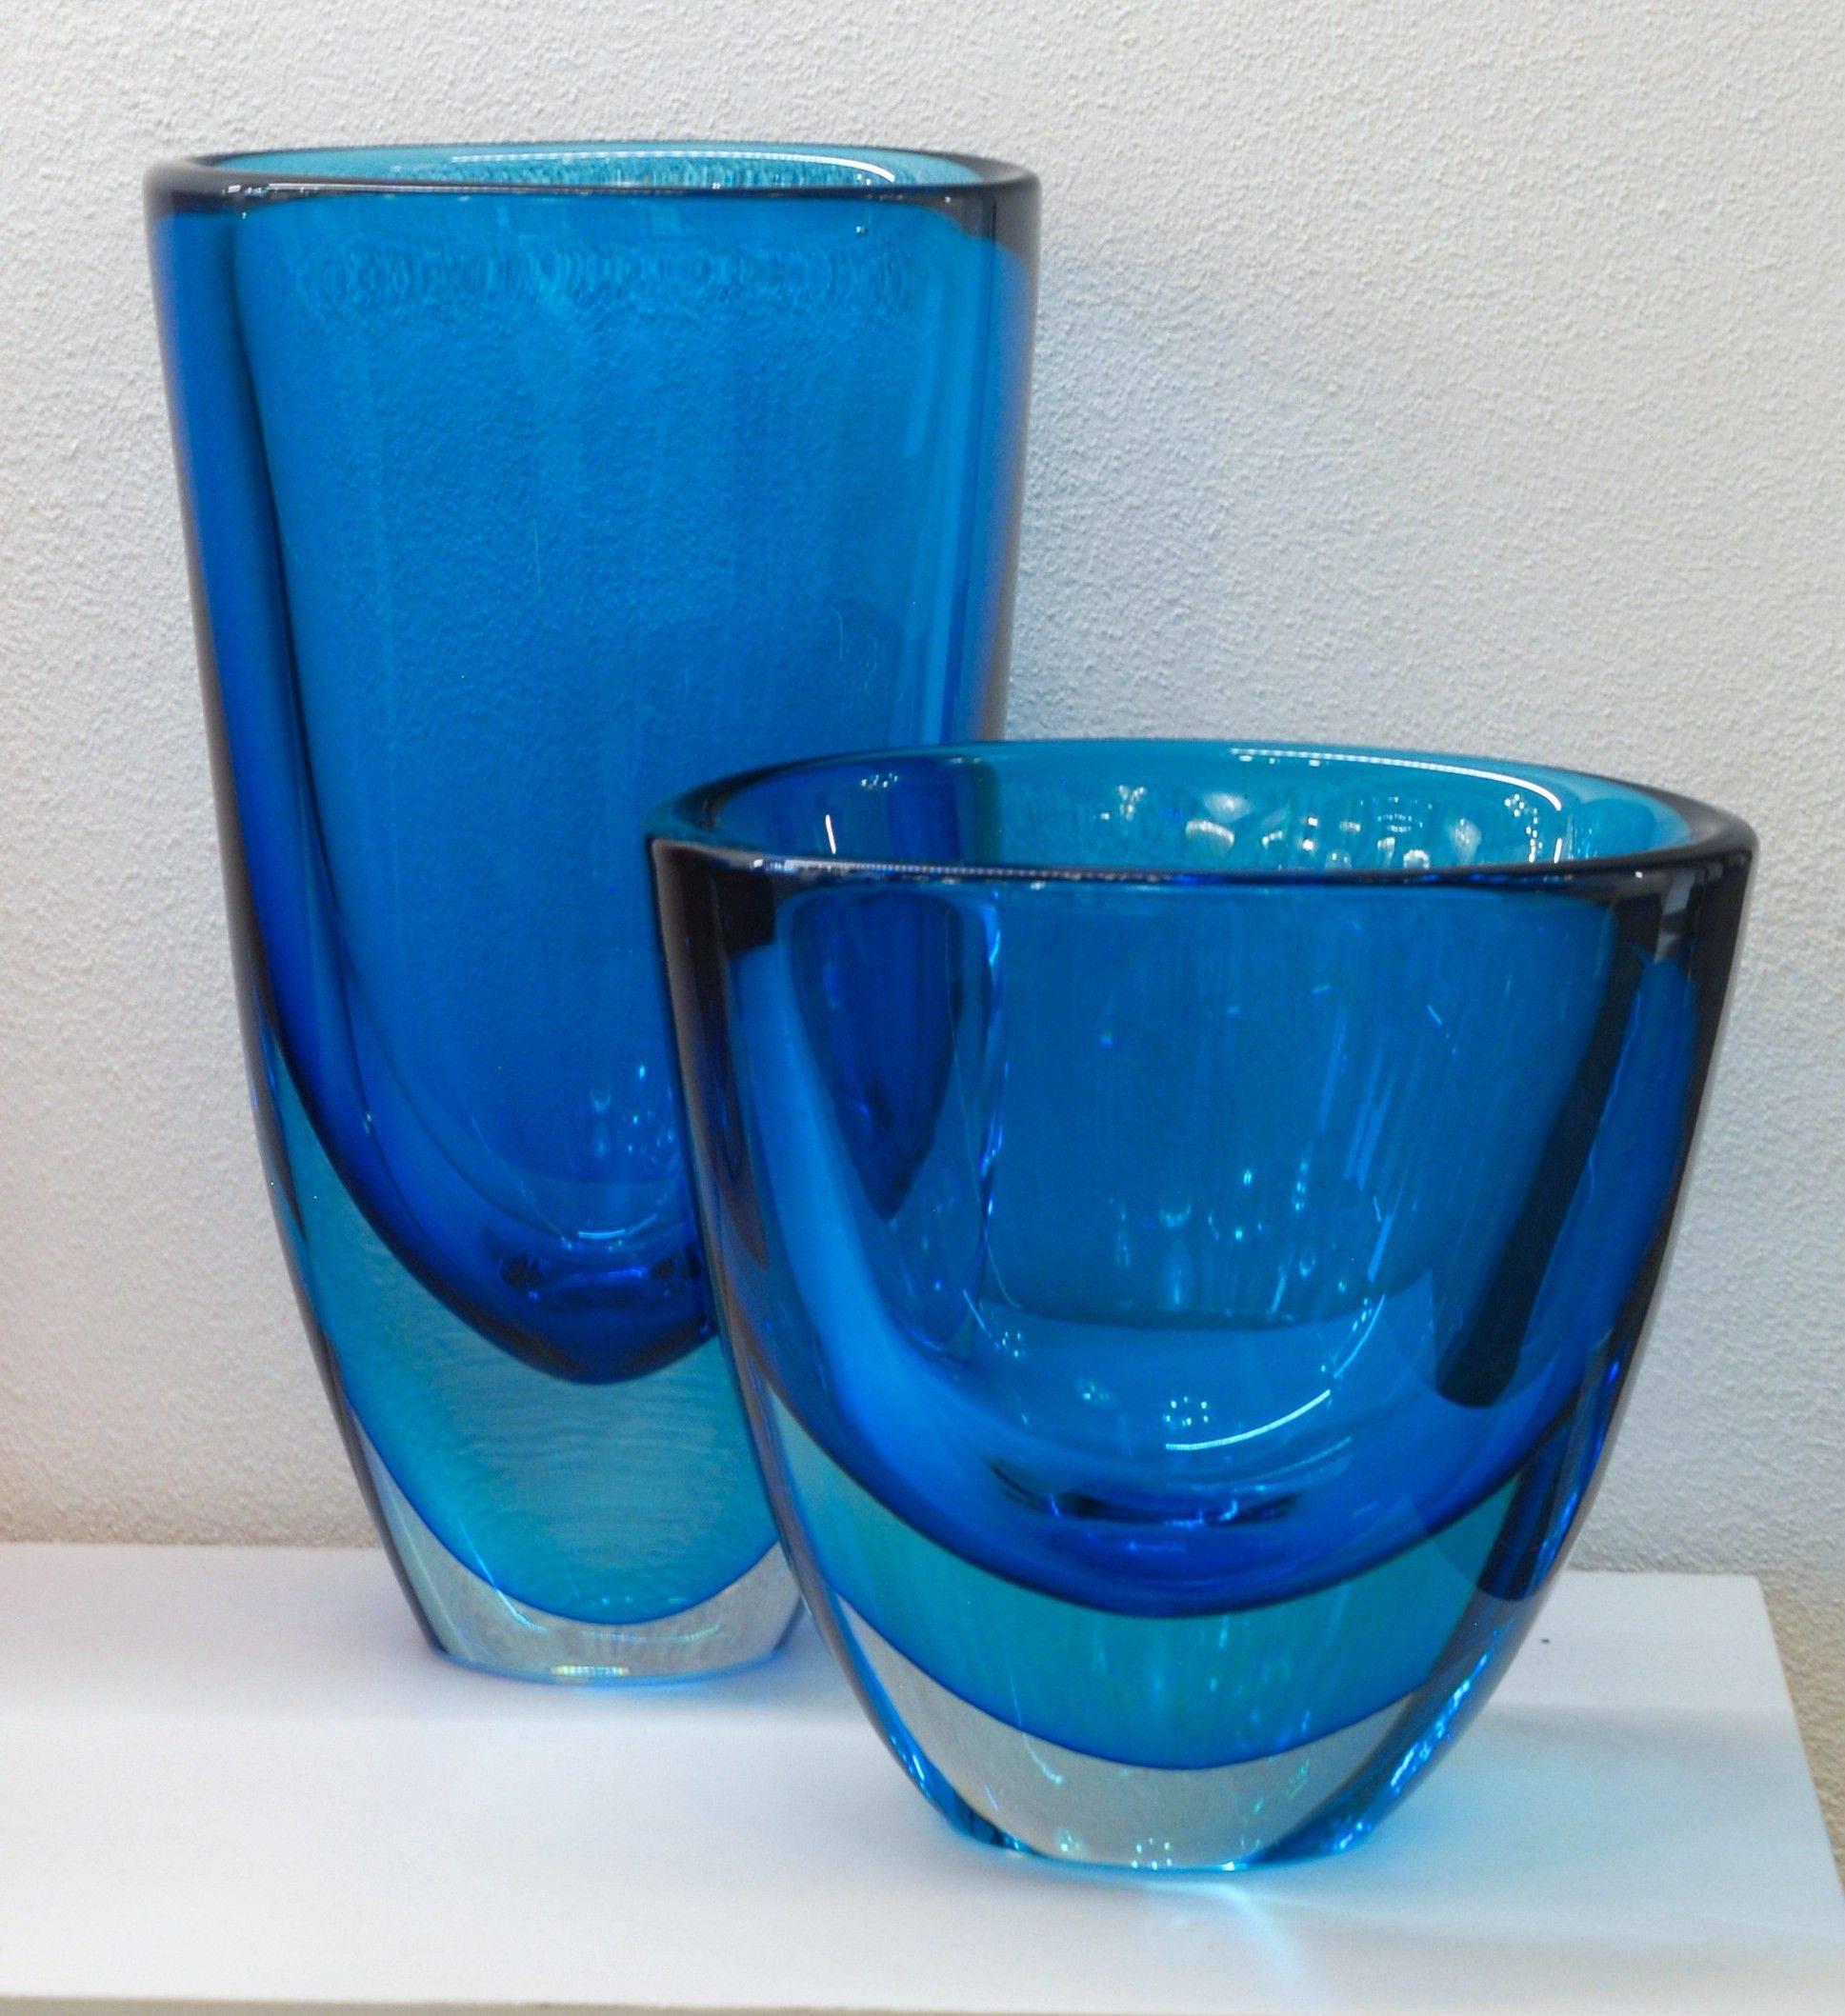 Art Glass Stefano Toso Pair of Sommerso Acquamare and Cobalt Vases, Massiccio with Sbruffi